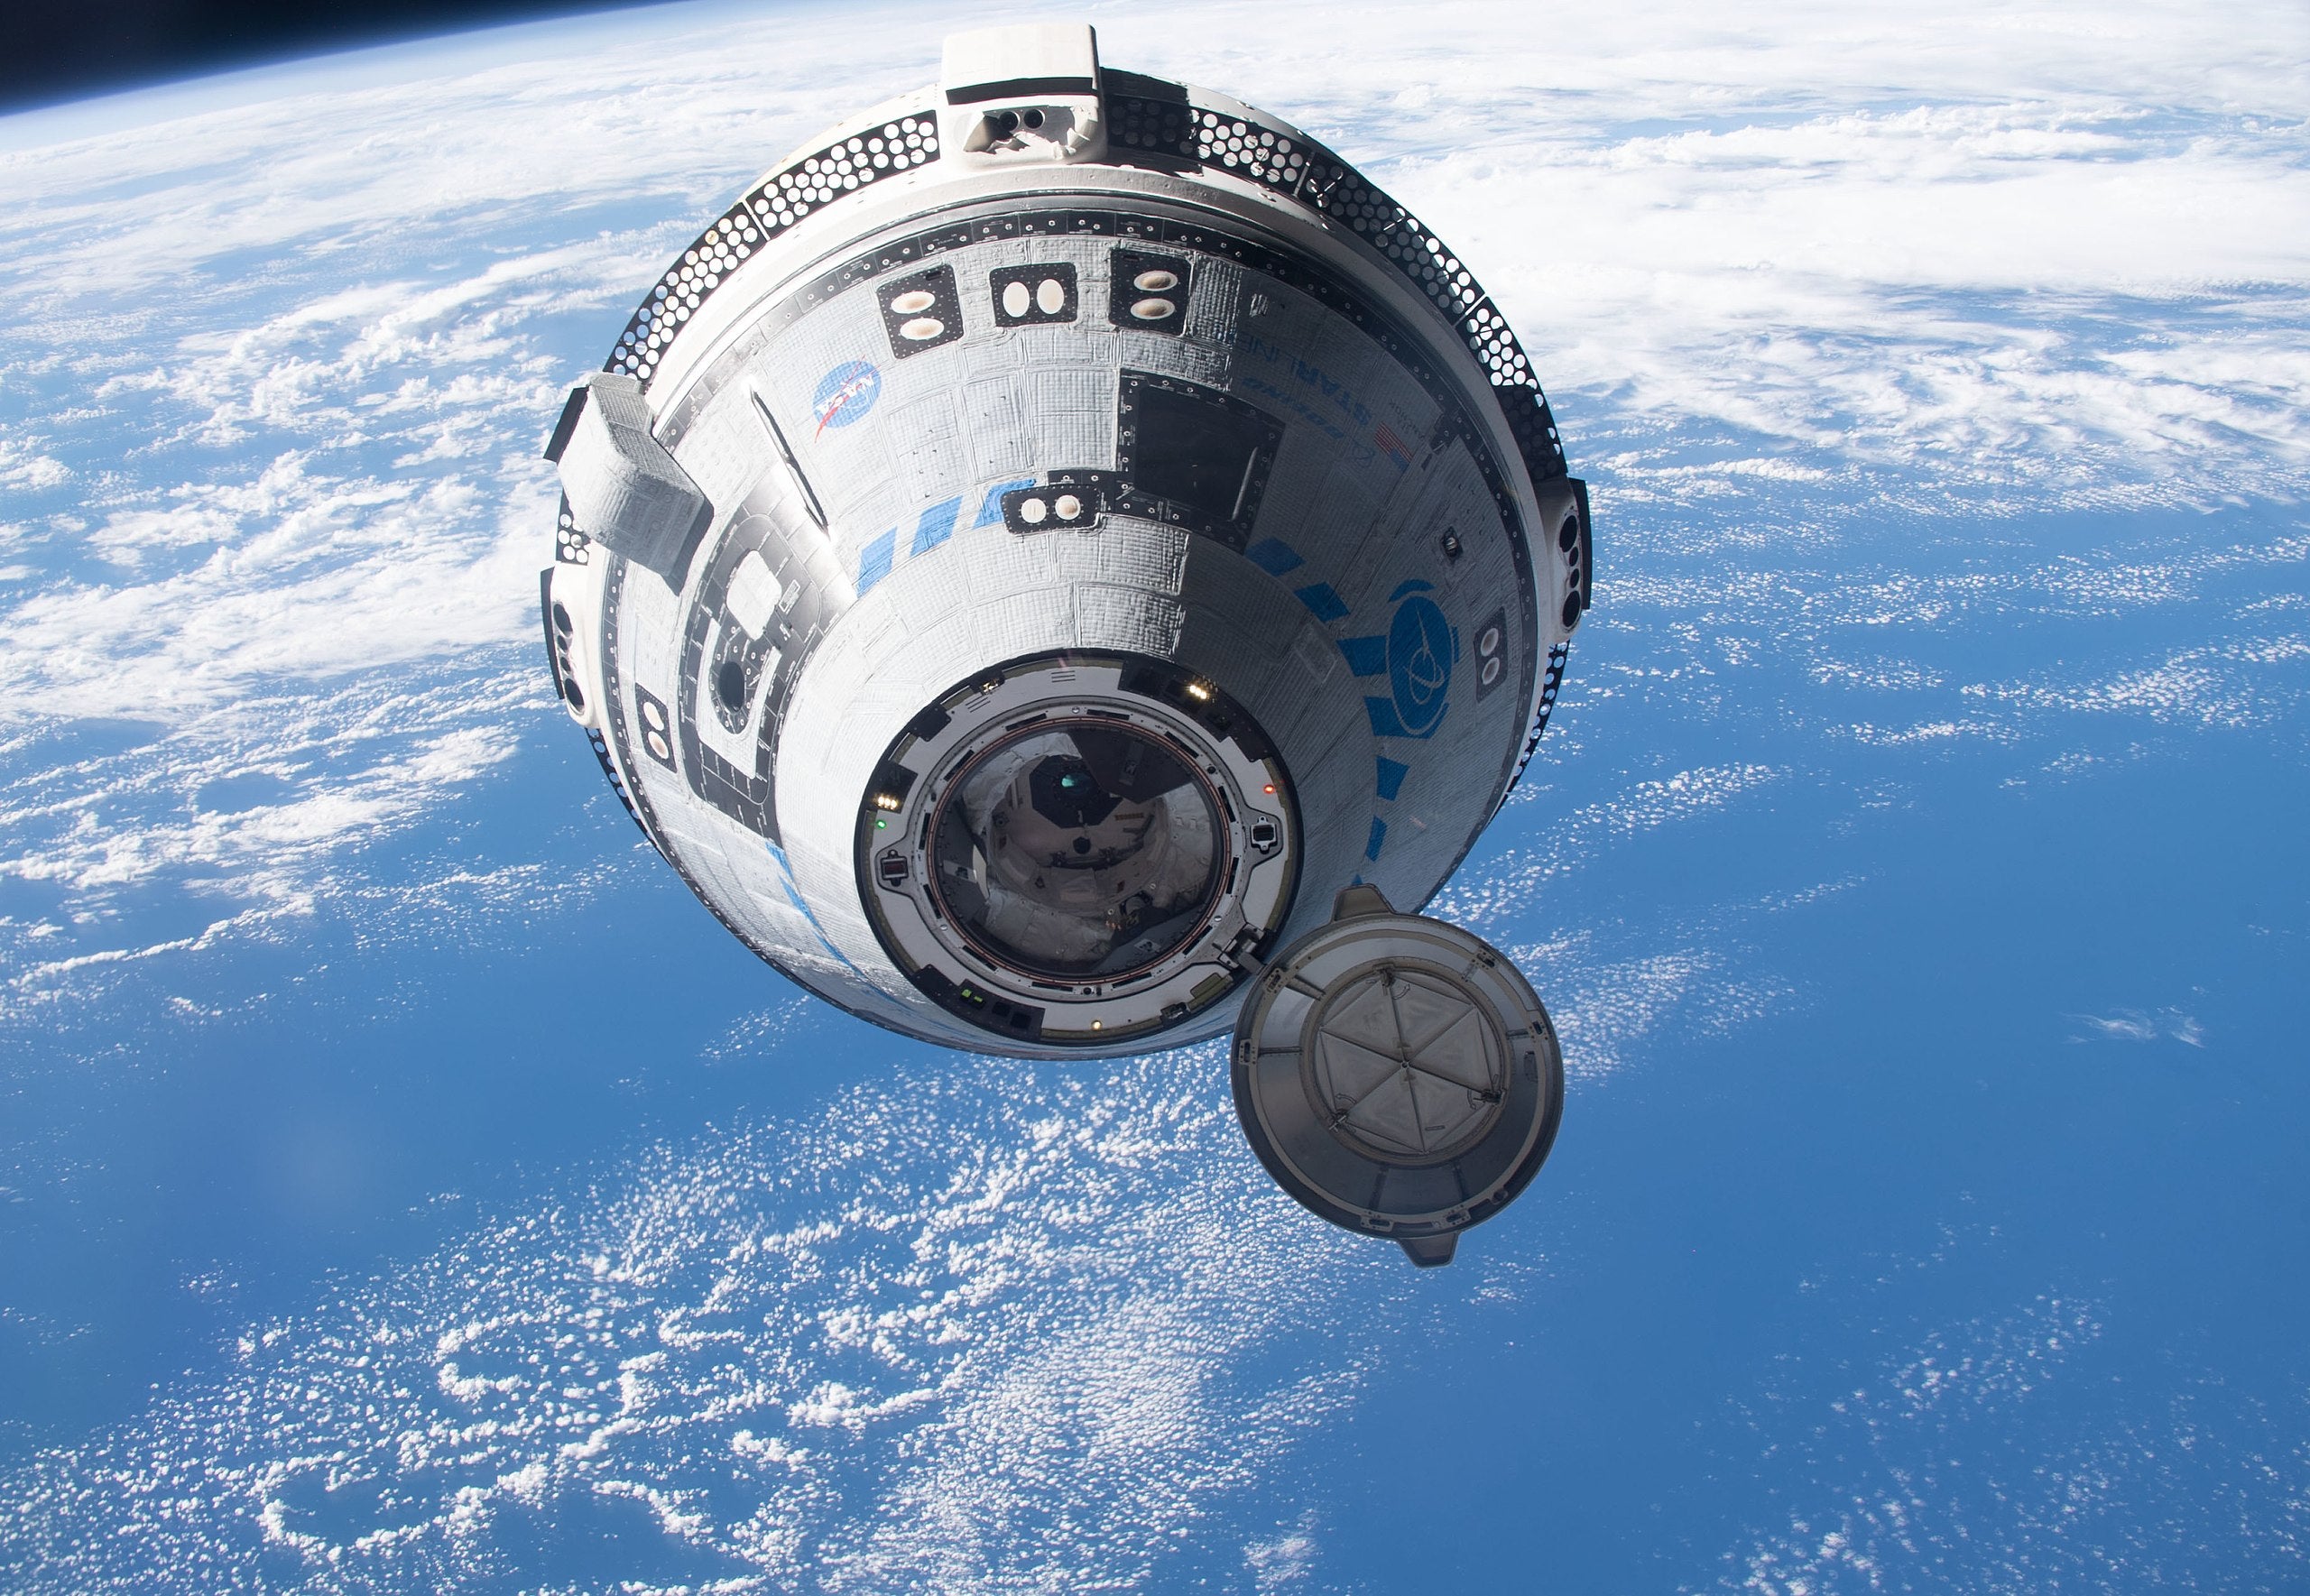 Boeing's Starliner approaching the ISS during the company's OFT-2 mission in May 2022. (Photo: NASA)